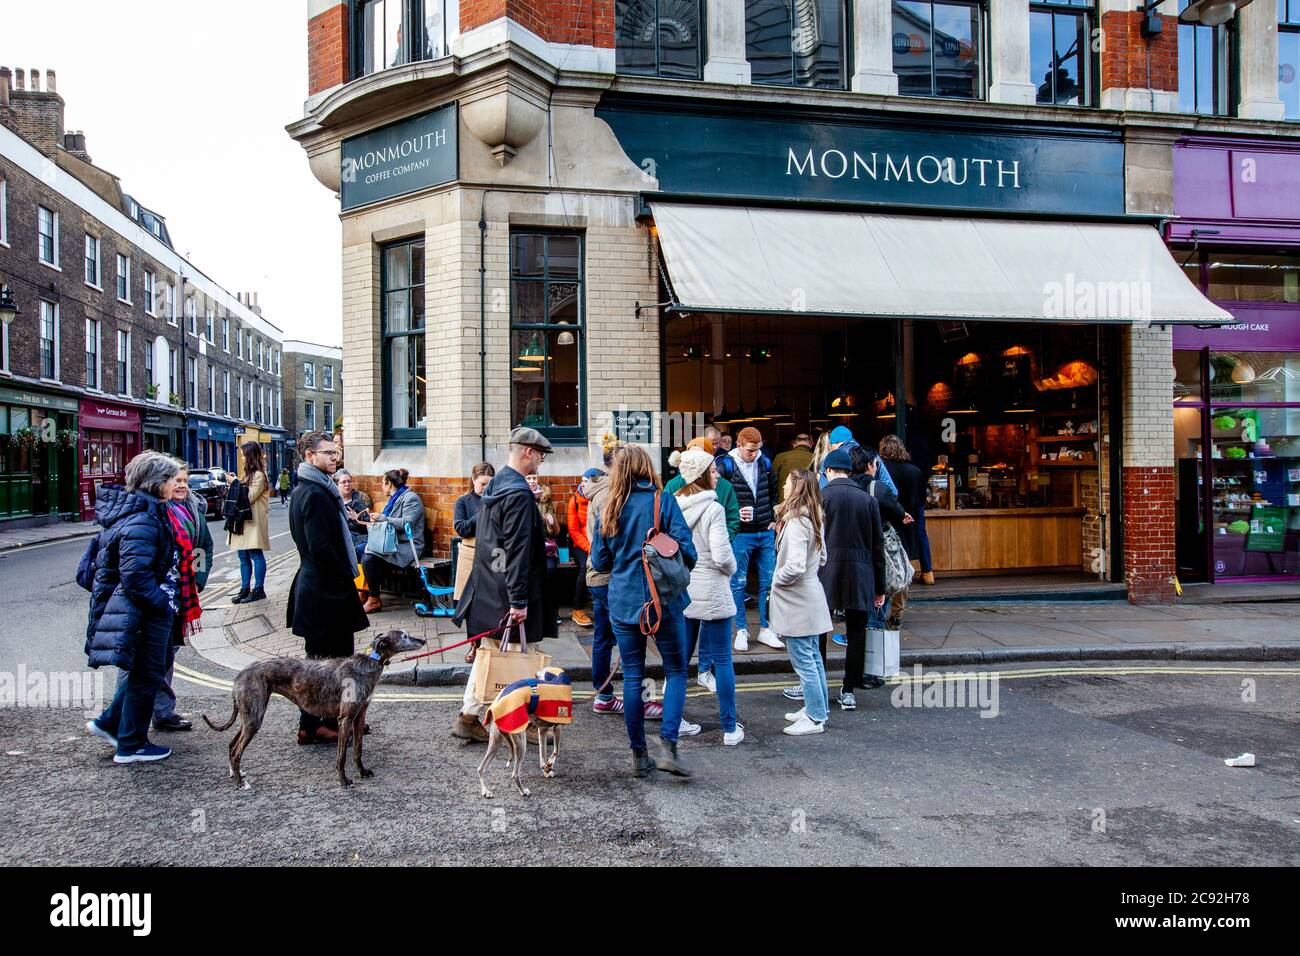 People Queueing For Coffee At The Monmouth Coffee Company, Borough Market, London, England. Stock Photo